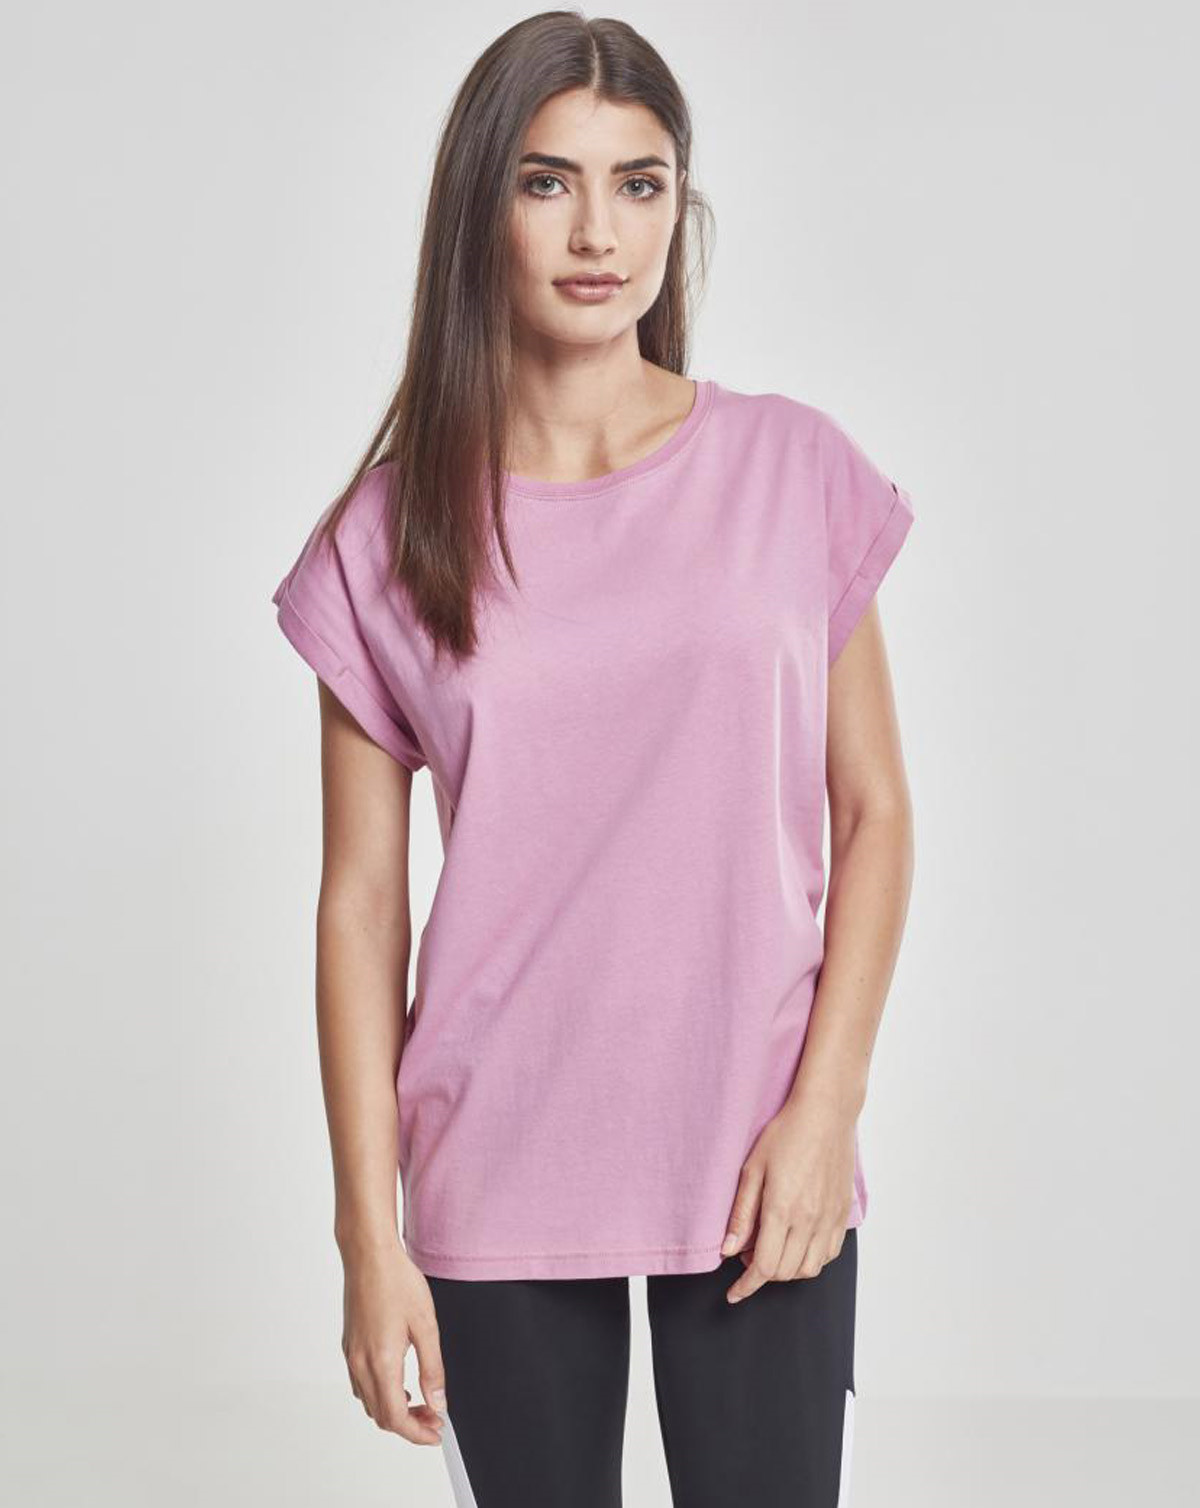 Urban Classics Ladies Extended Shoulder Tee (Cool Pink, L)